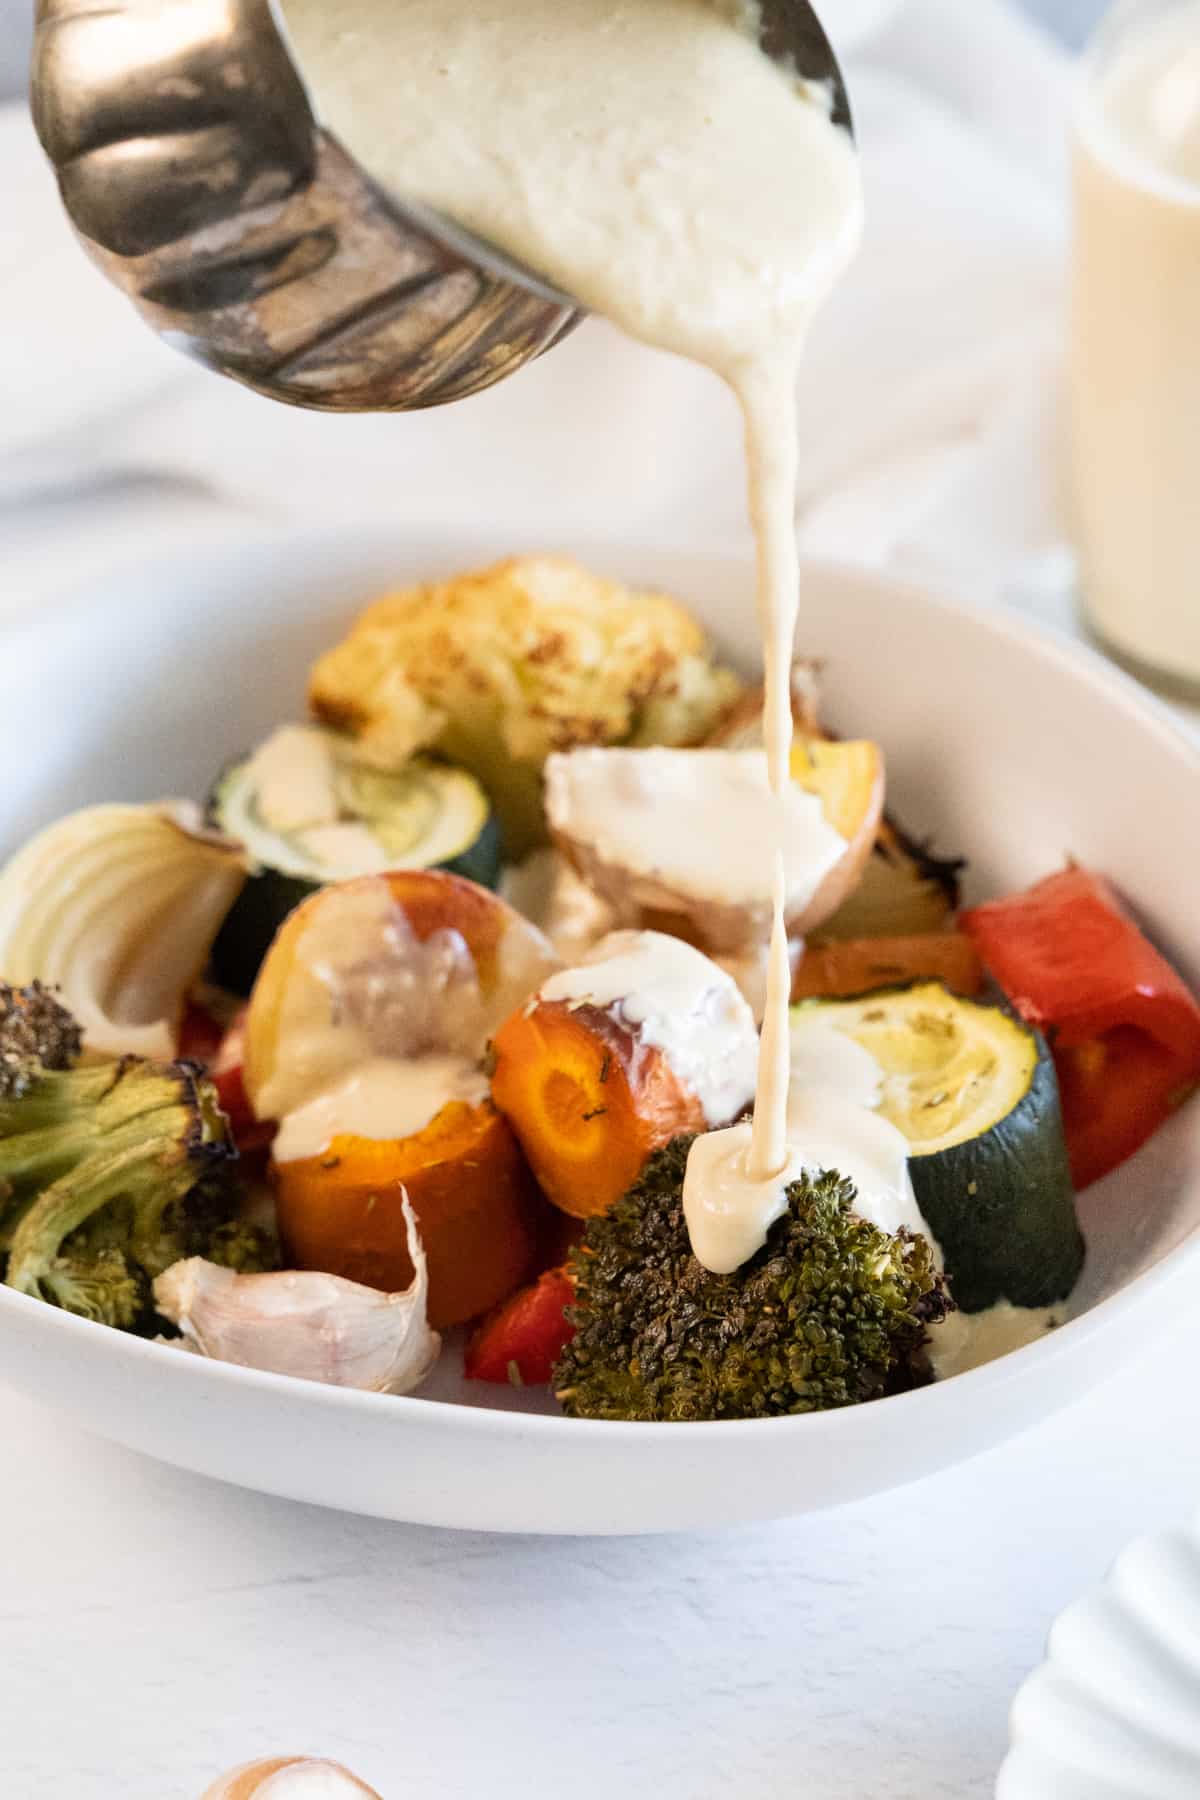 whiteish sauce being poured out of a metal sauce pot over roasted vegetables